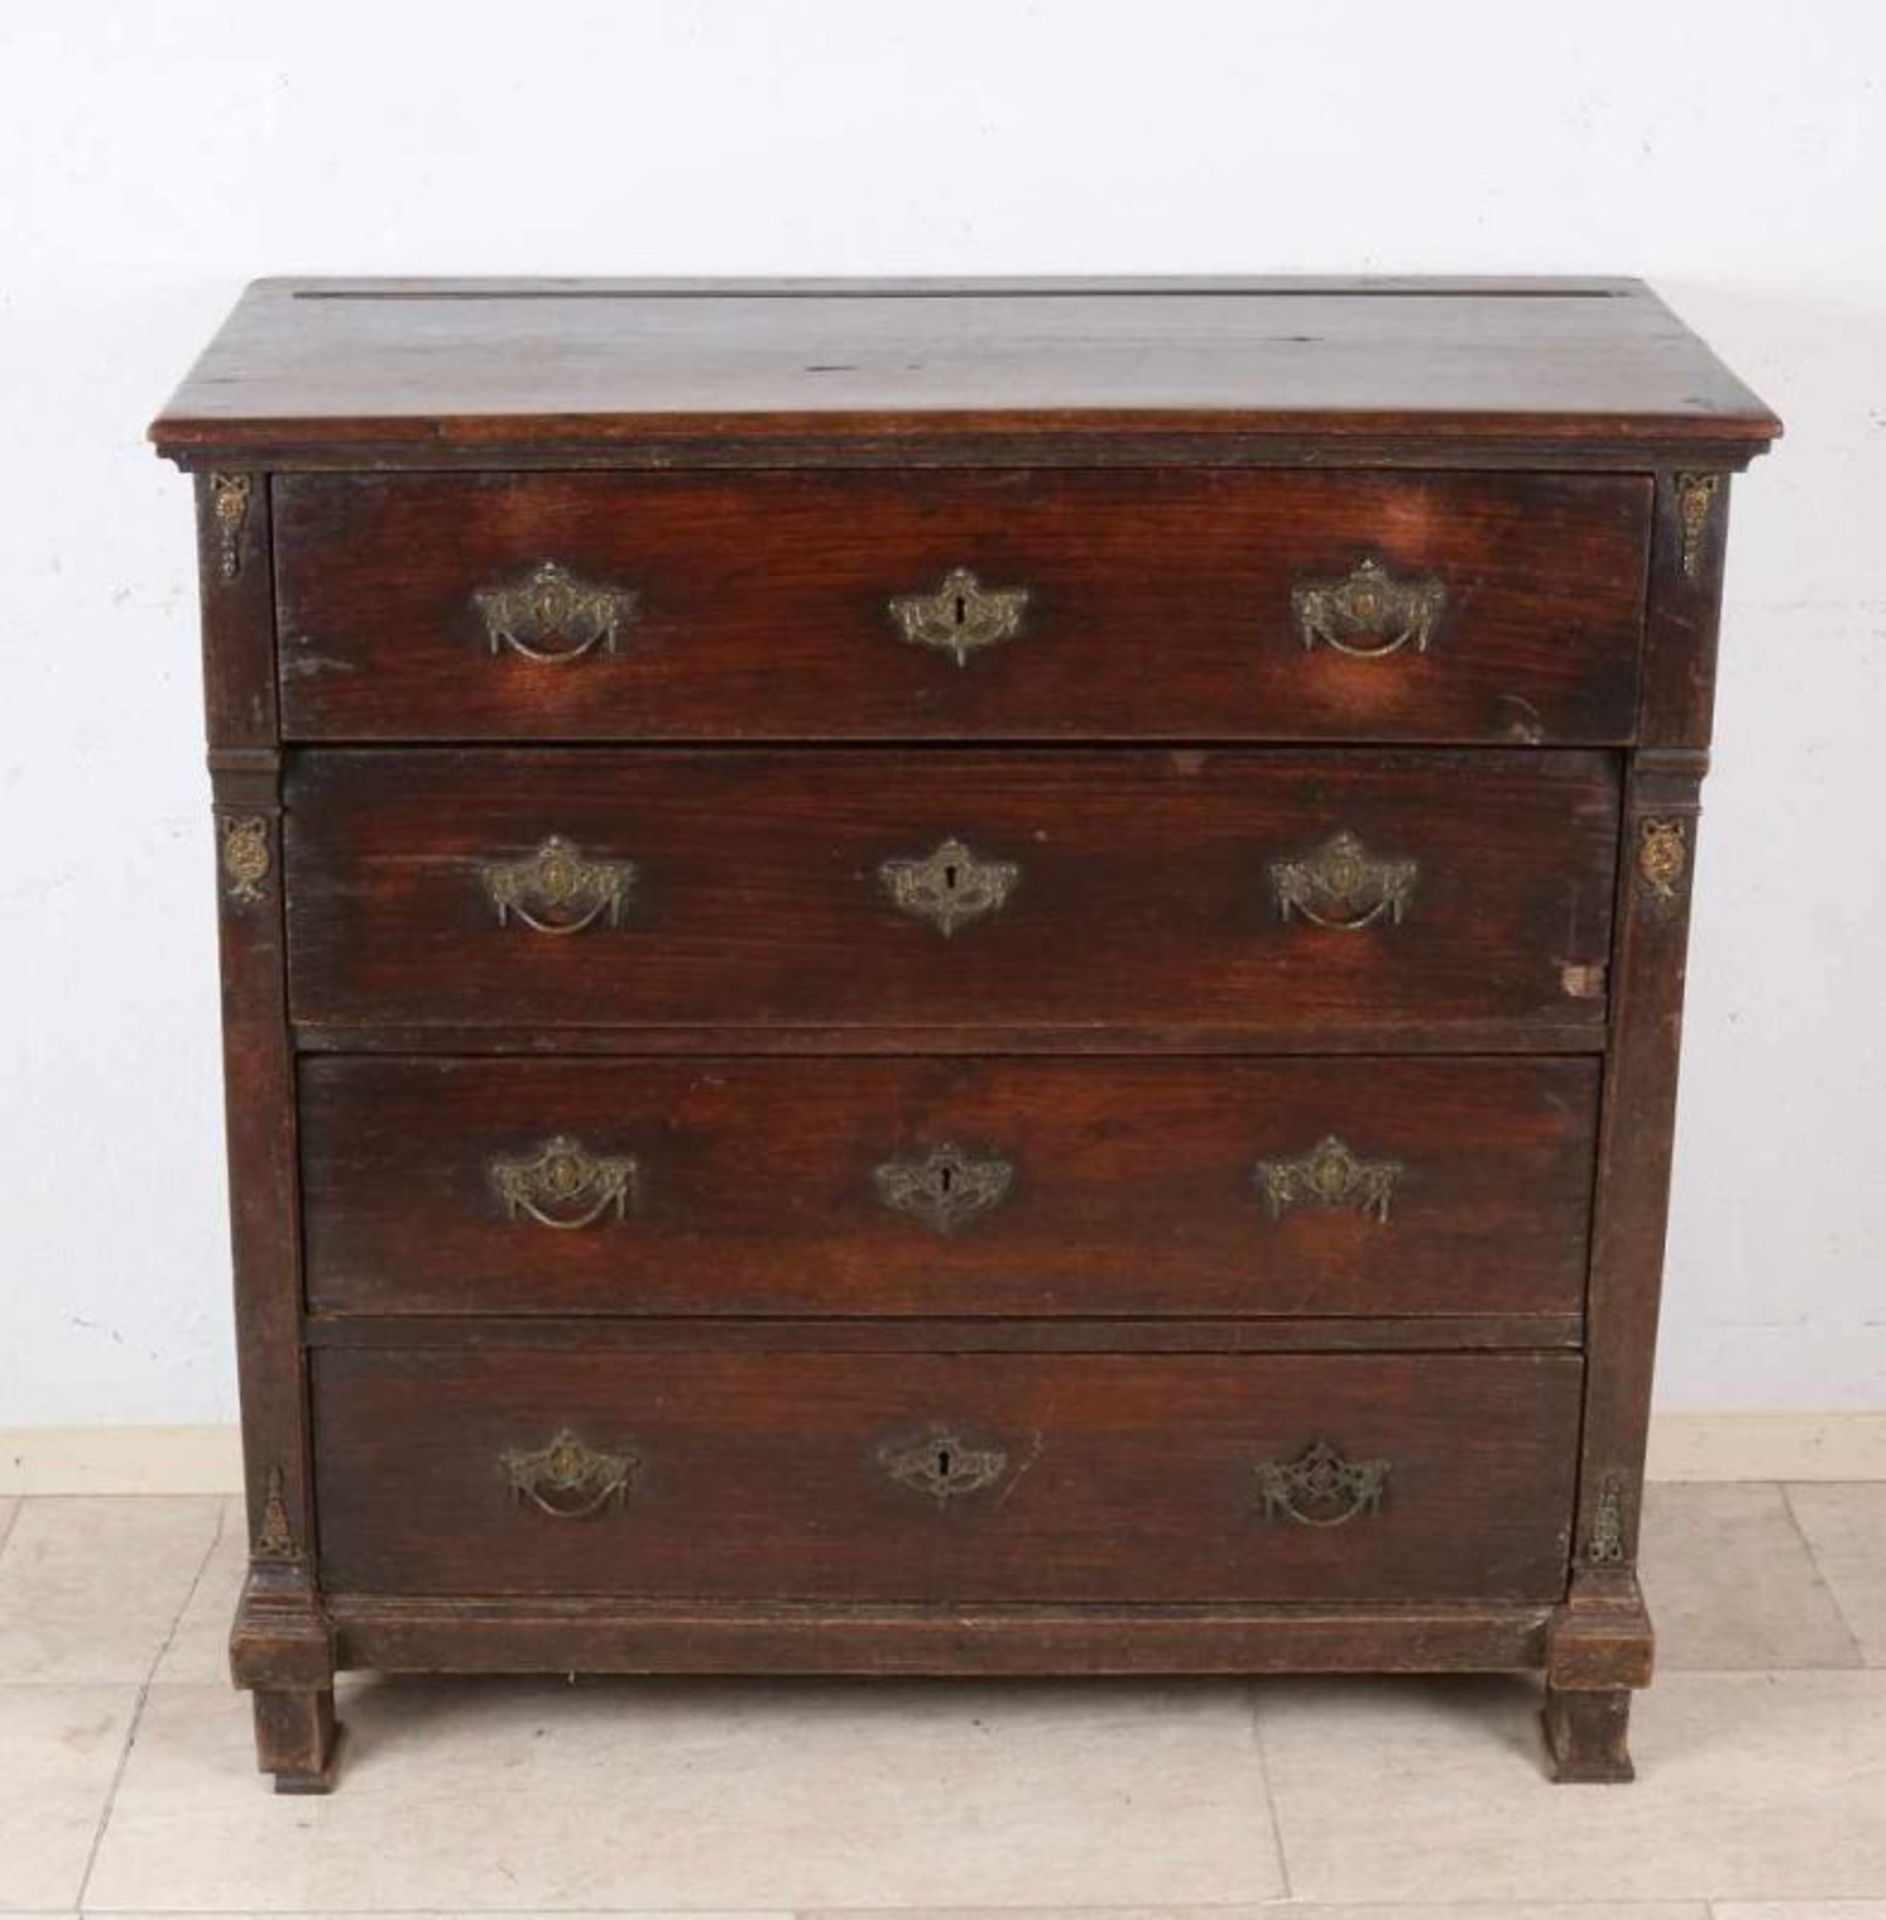 Dutch oak Louis Seize four-drawer chest of drawers with bronze decorations and fittings. Around